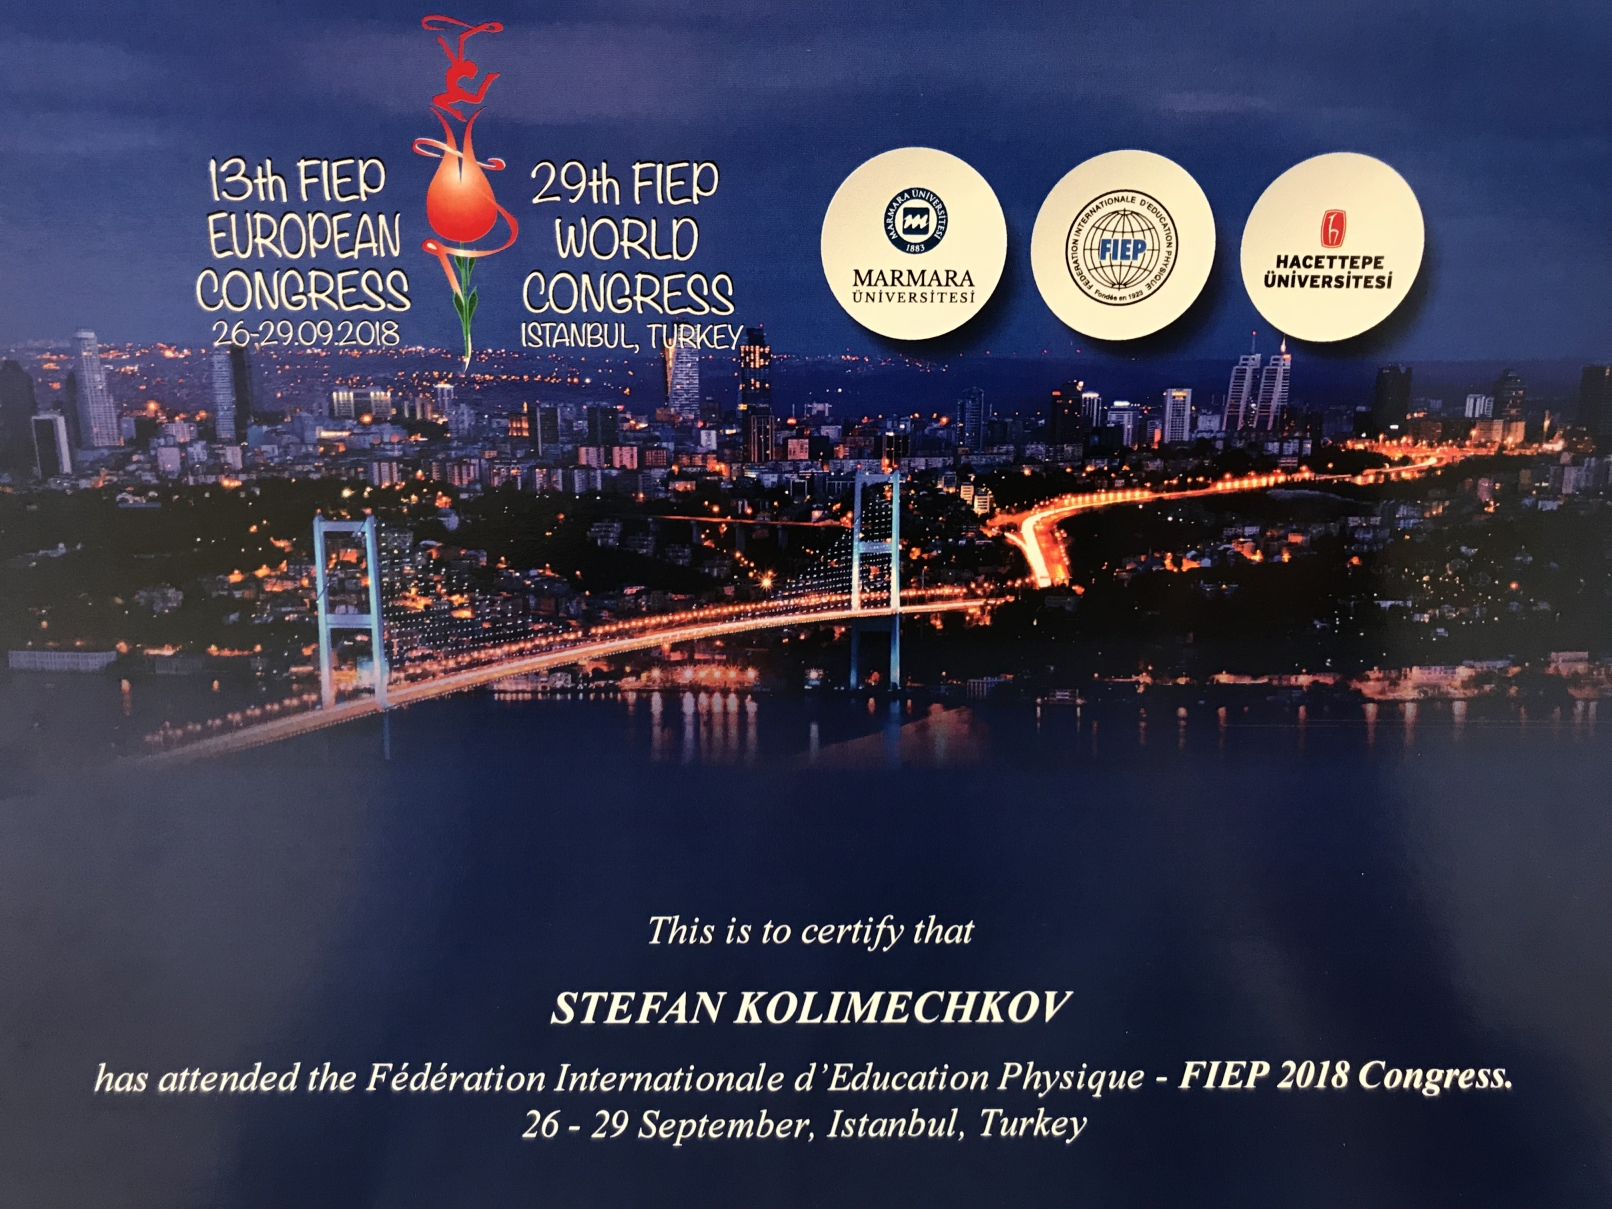 Dr Kolimechkov - certificate of participation at the 13th FIEP European Congress